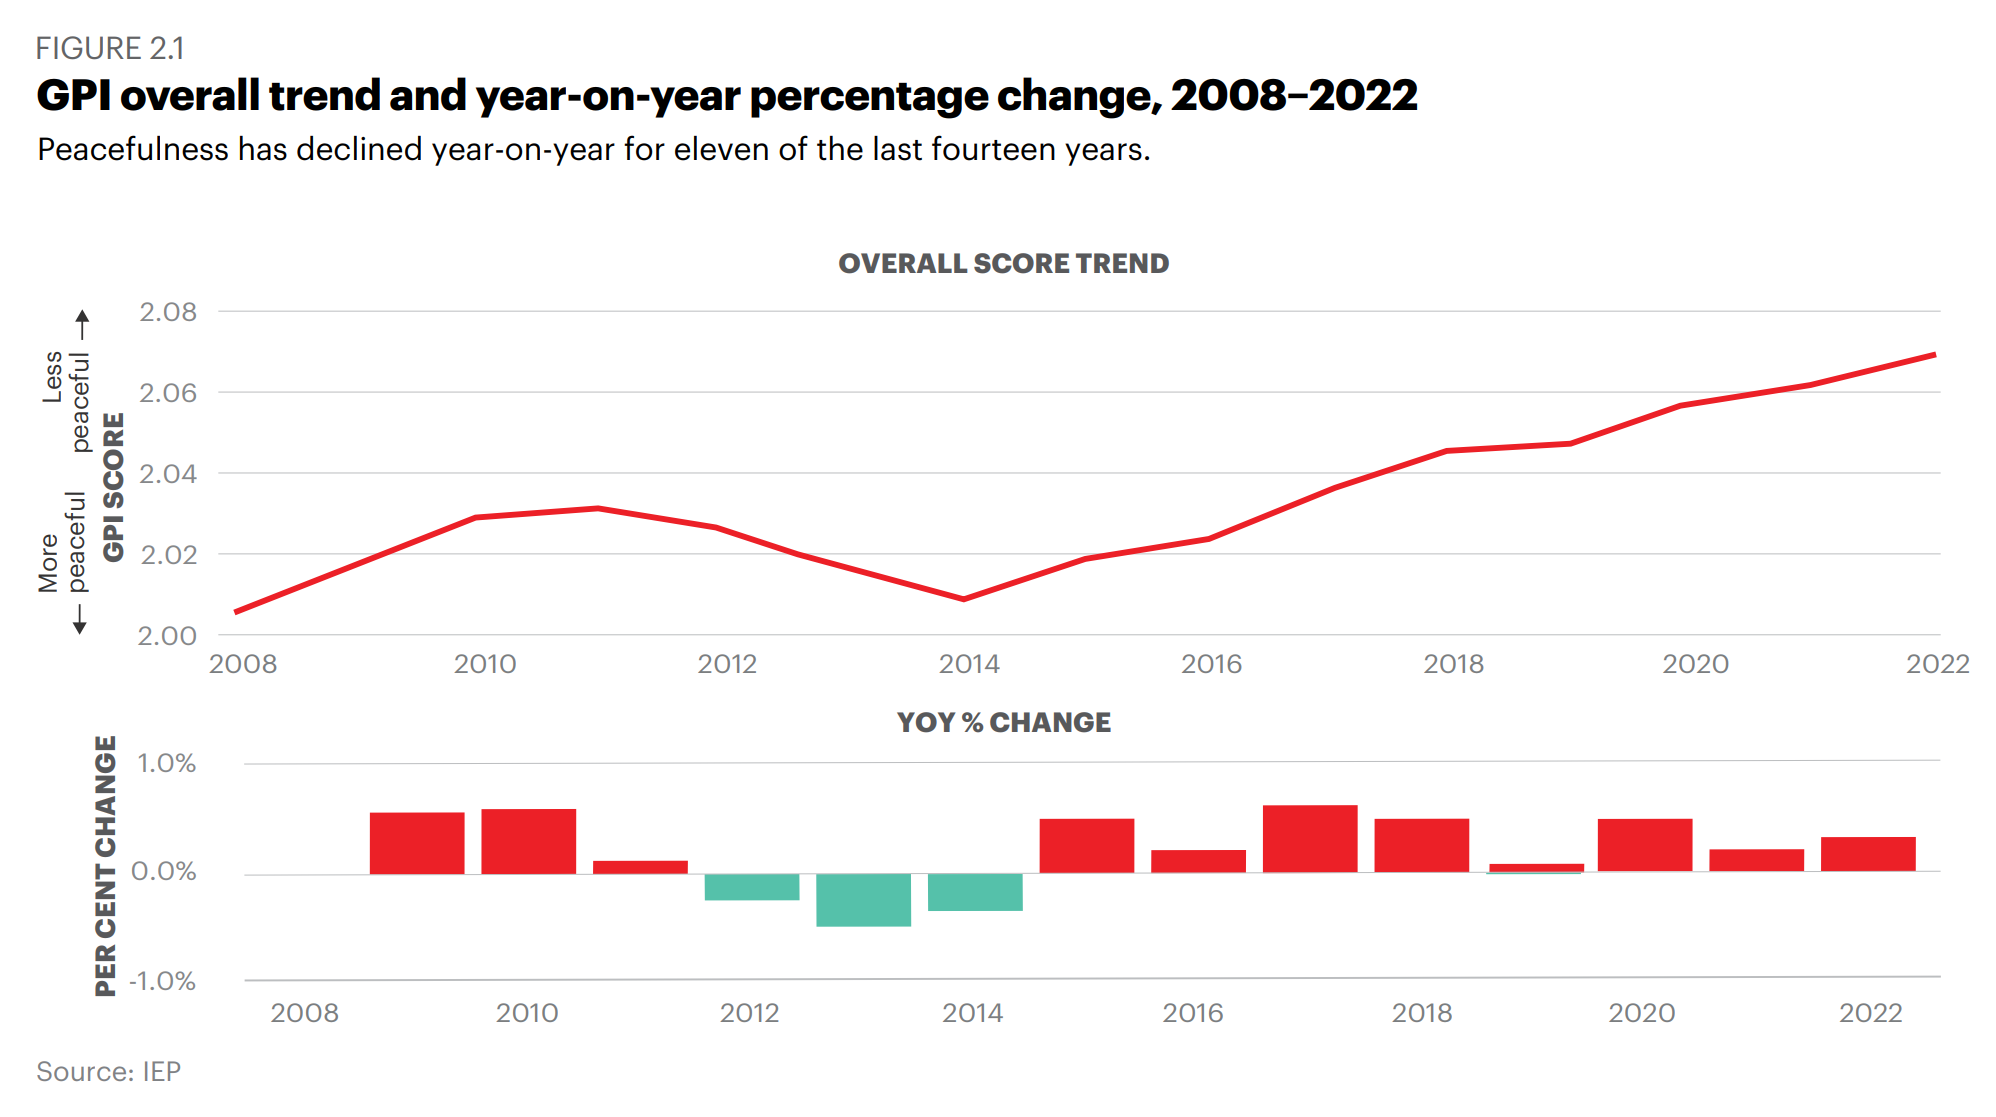 Global Peace Index overall trend and year-on-year percentage change, 2008-2022. In 2022, peacefulness declined to lowest level in 15 years and declined year-on-year for eleven of the previous fourteen years. Graphic: IEP